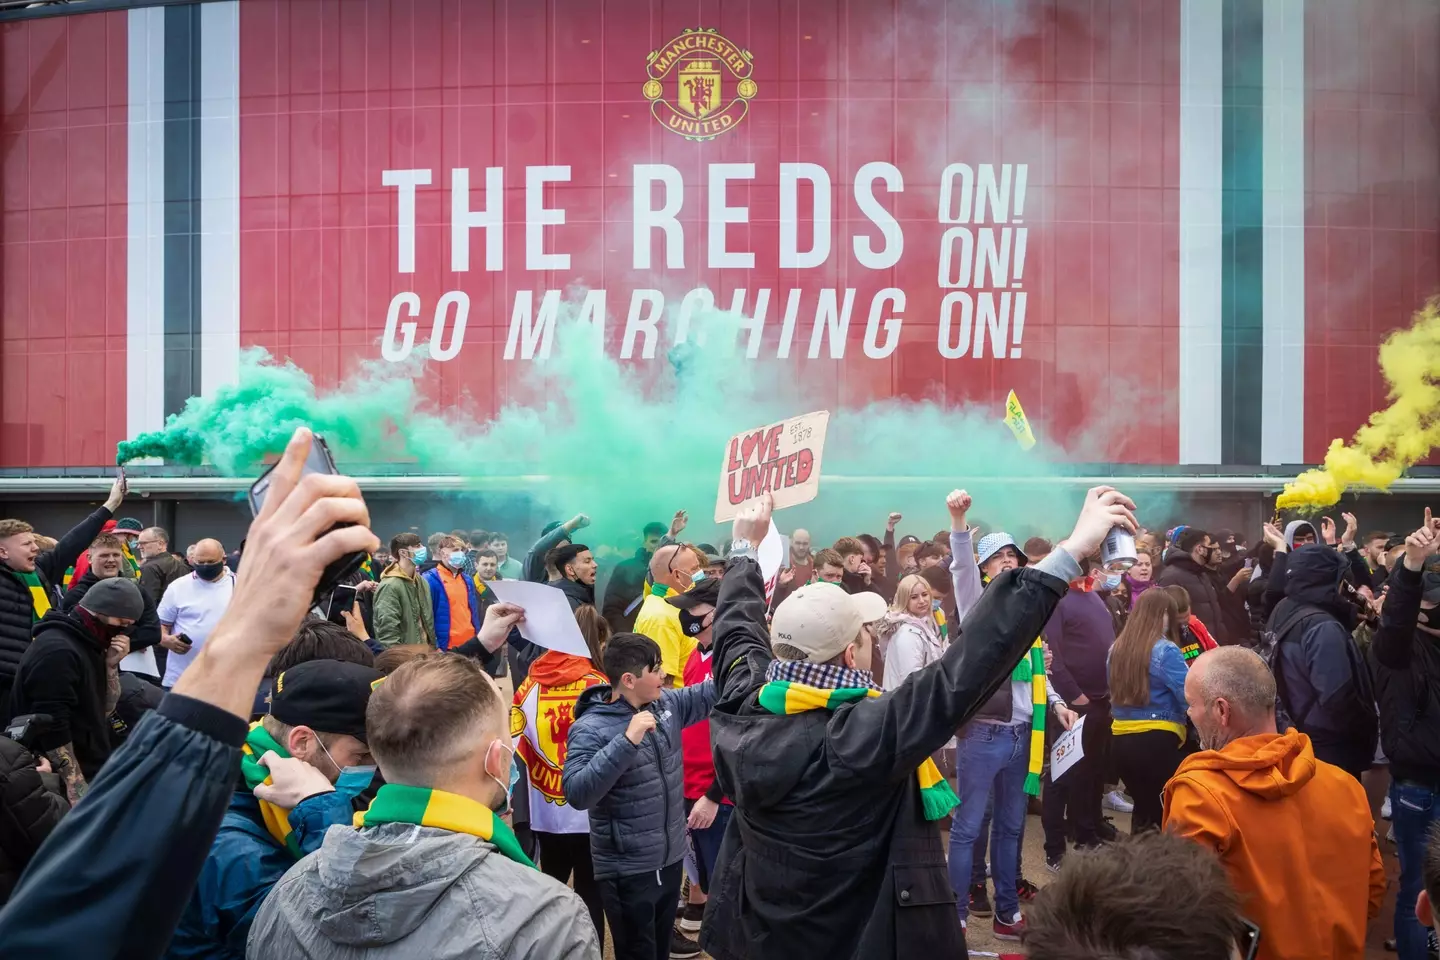 The protest on May 2nd 2021 was to vast that the Premier League had to suspend the fixture due to safety concerns. (Alamy)